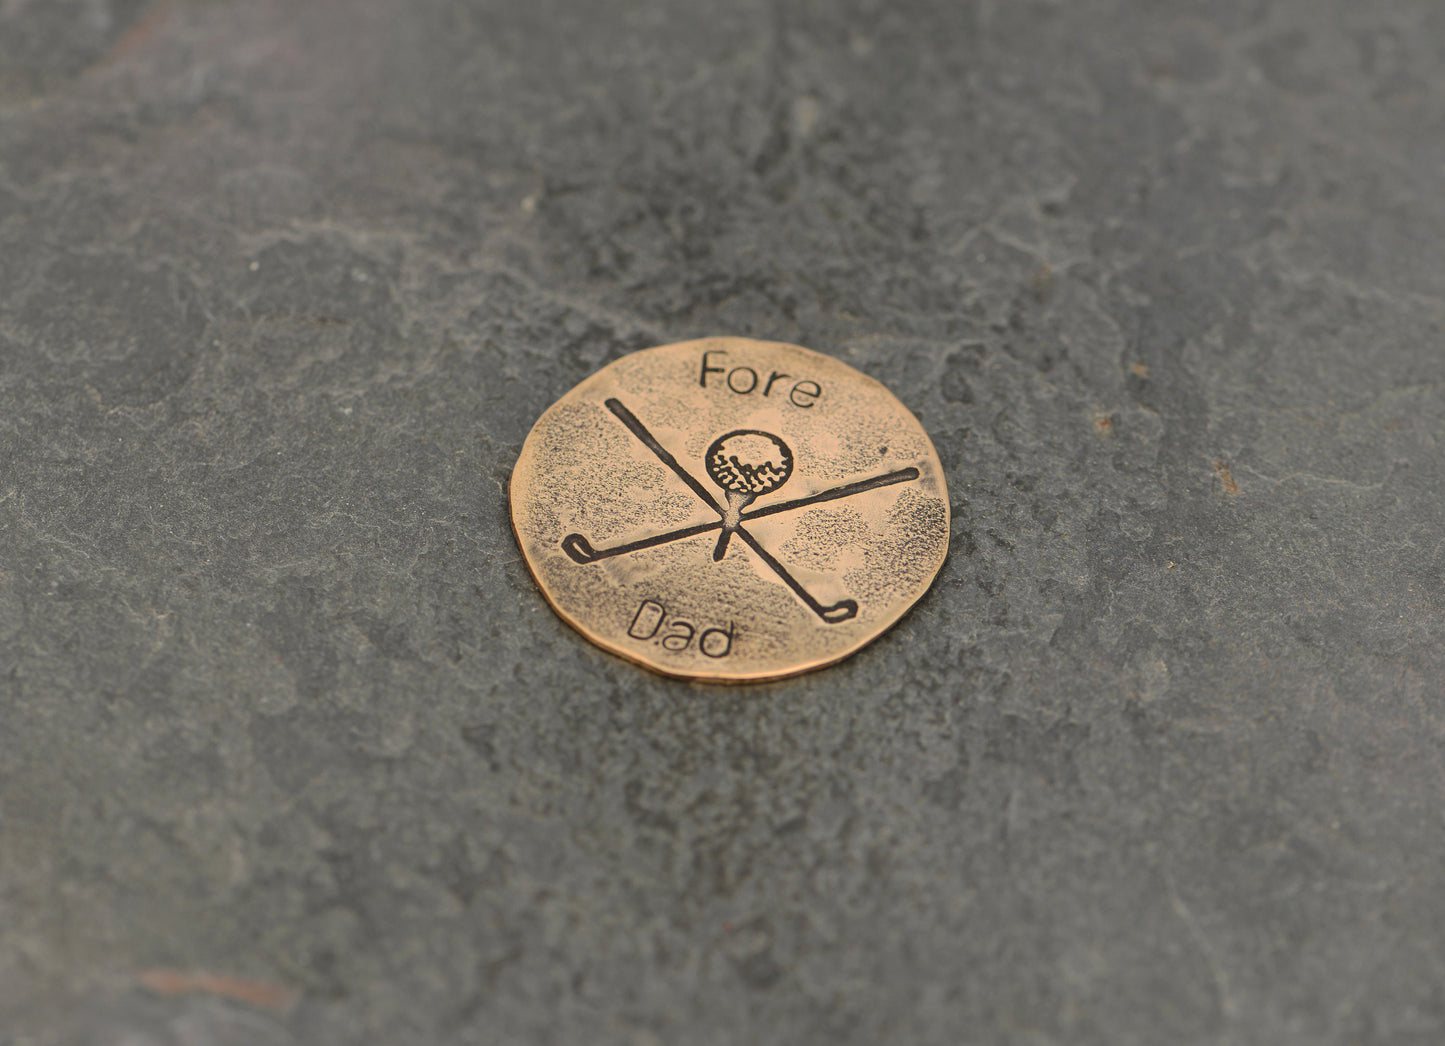 Fore Dad Bronze Golf Ball Marker with Rustic Tee Design for Dads and Father’s Day